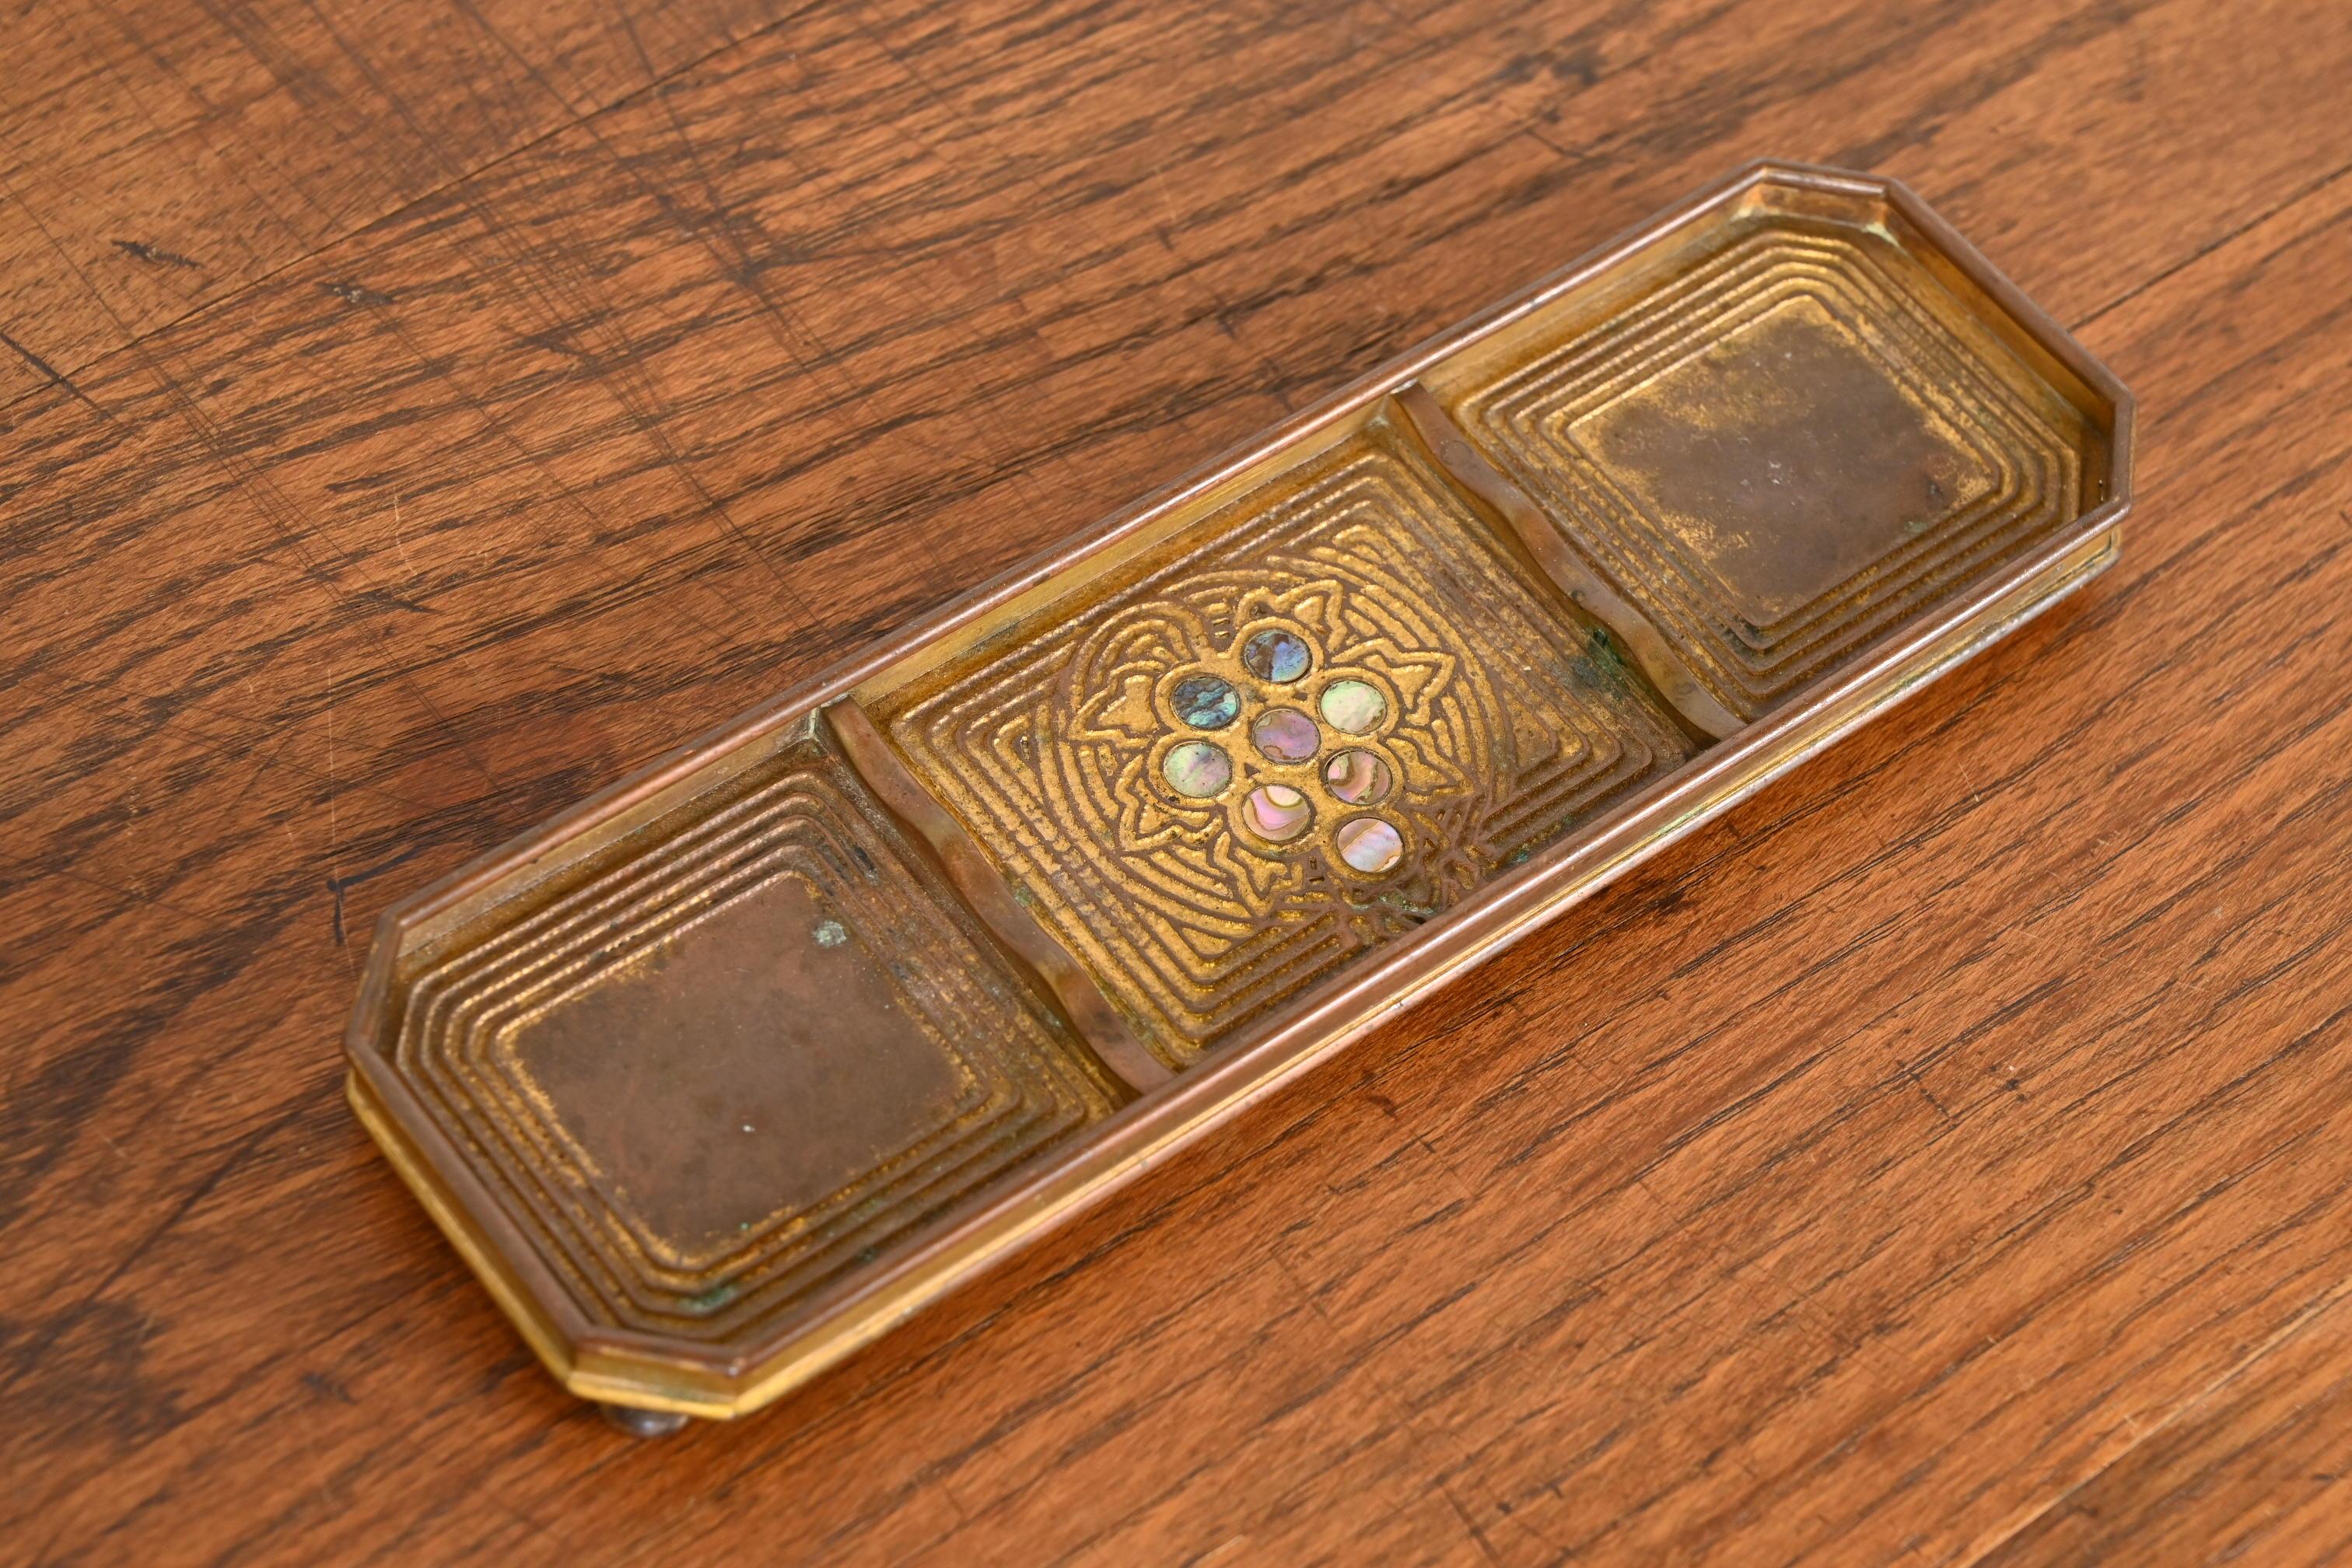 A gorgeous Art Nouveau period gilt bronze and inlaid abalone pen tray

By Tiffany Studios

New York, USA, Early 20th Century

Measures: 8.75